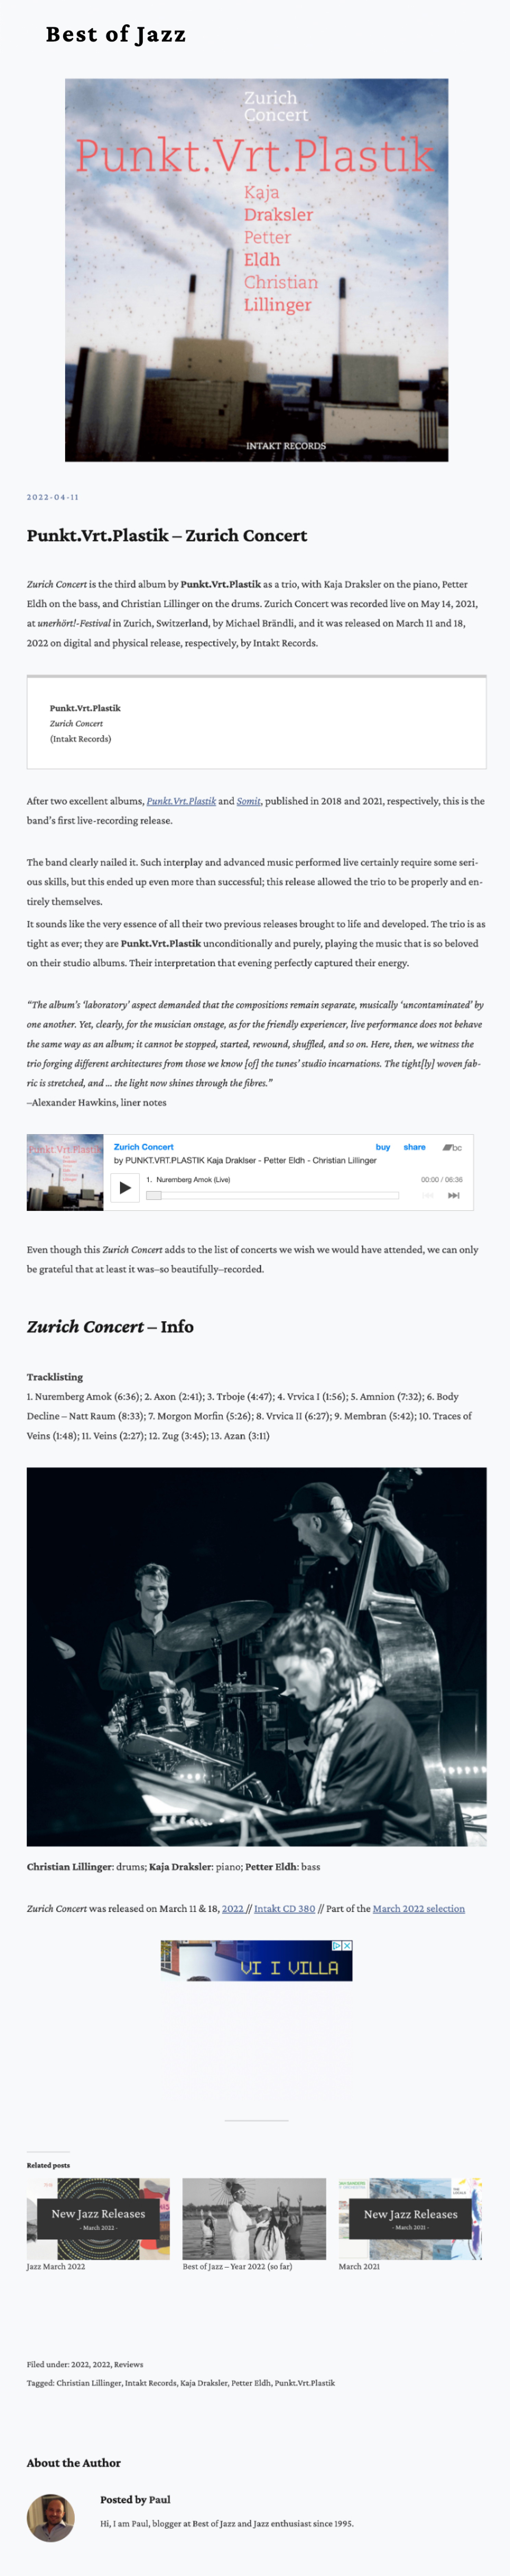 Zurich Concert is the third album by Punkt.Vrt.Plastik as a trio, with Kaja Draksler on the piano, Petter Eldh on the bass, and Christian Lillinger on the drums. Zurich Concert was recorded live on May 14, 2021, at unerhört!-Festival in Zurich, Switzerland, by Michael Brändli, and it was released on March 11 and 18, 2022 on digital and physical release, respectively, by Intakt Records.